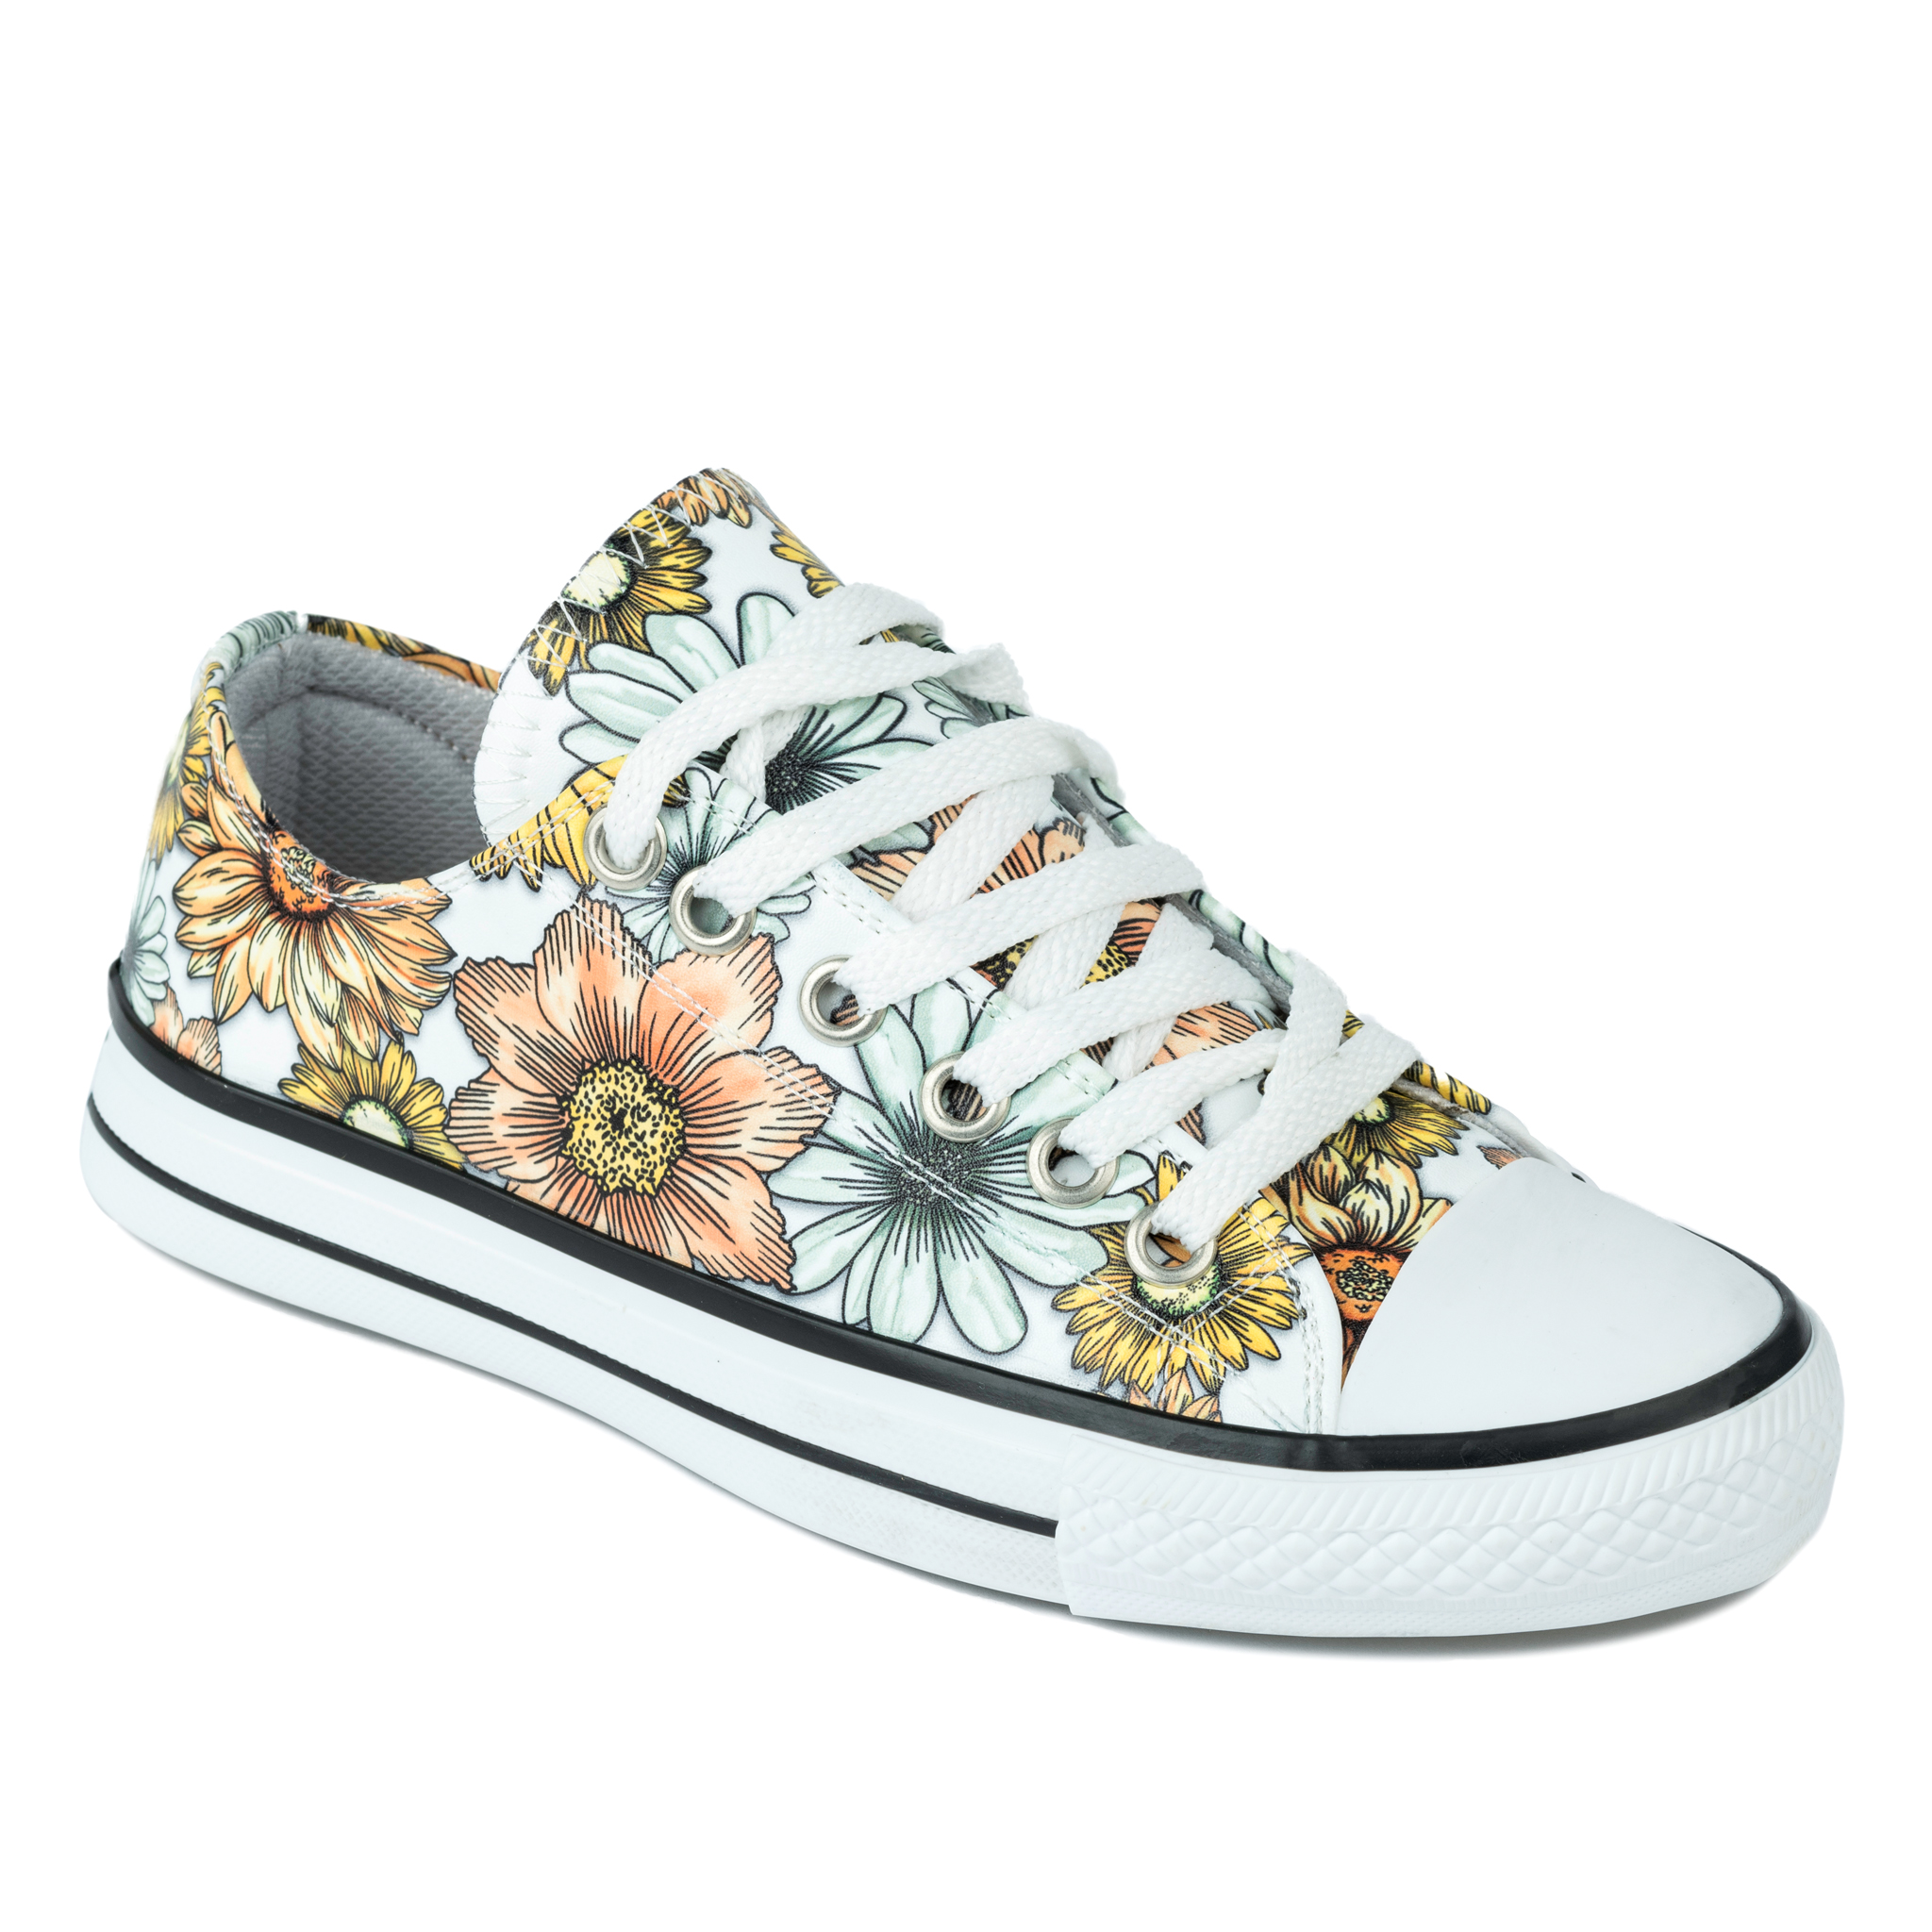 SNEAKERS WITH FLOWER PRINT - WHITE